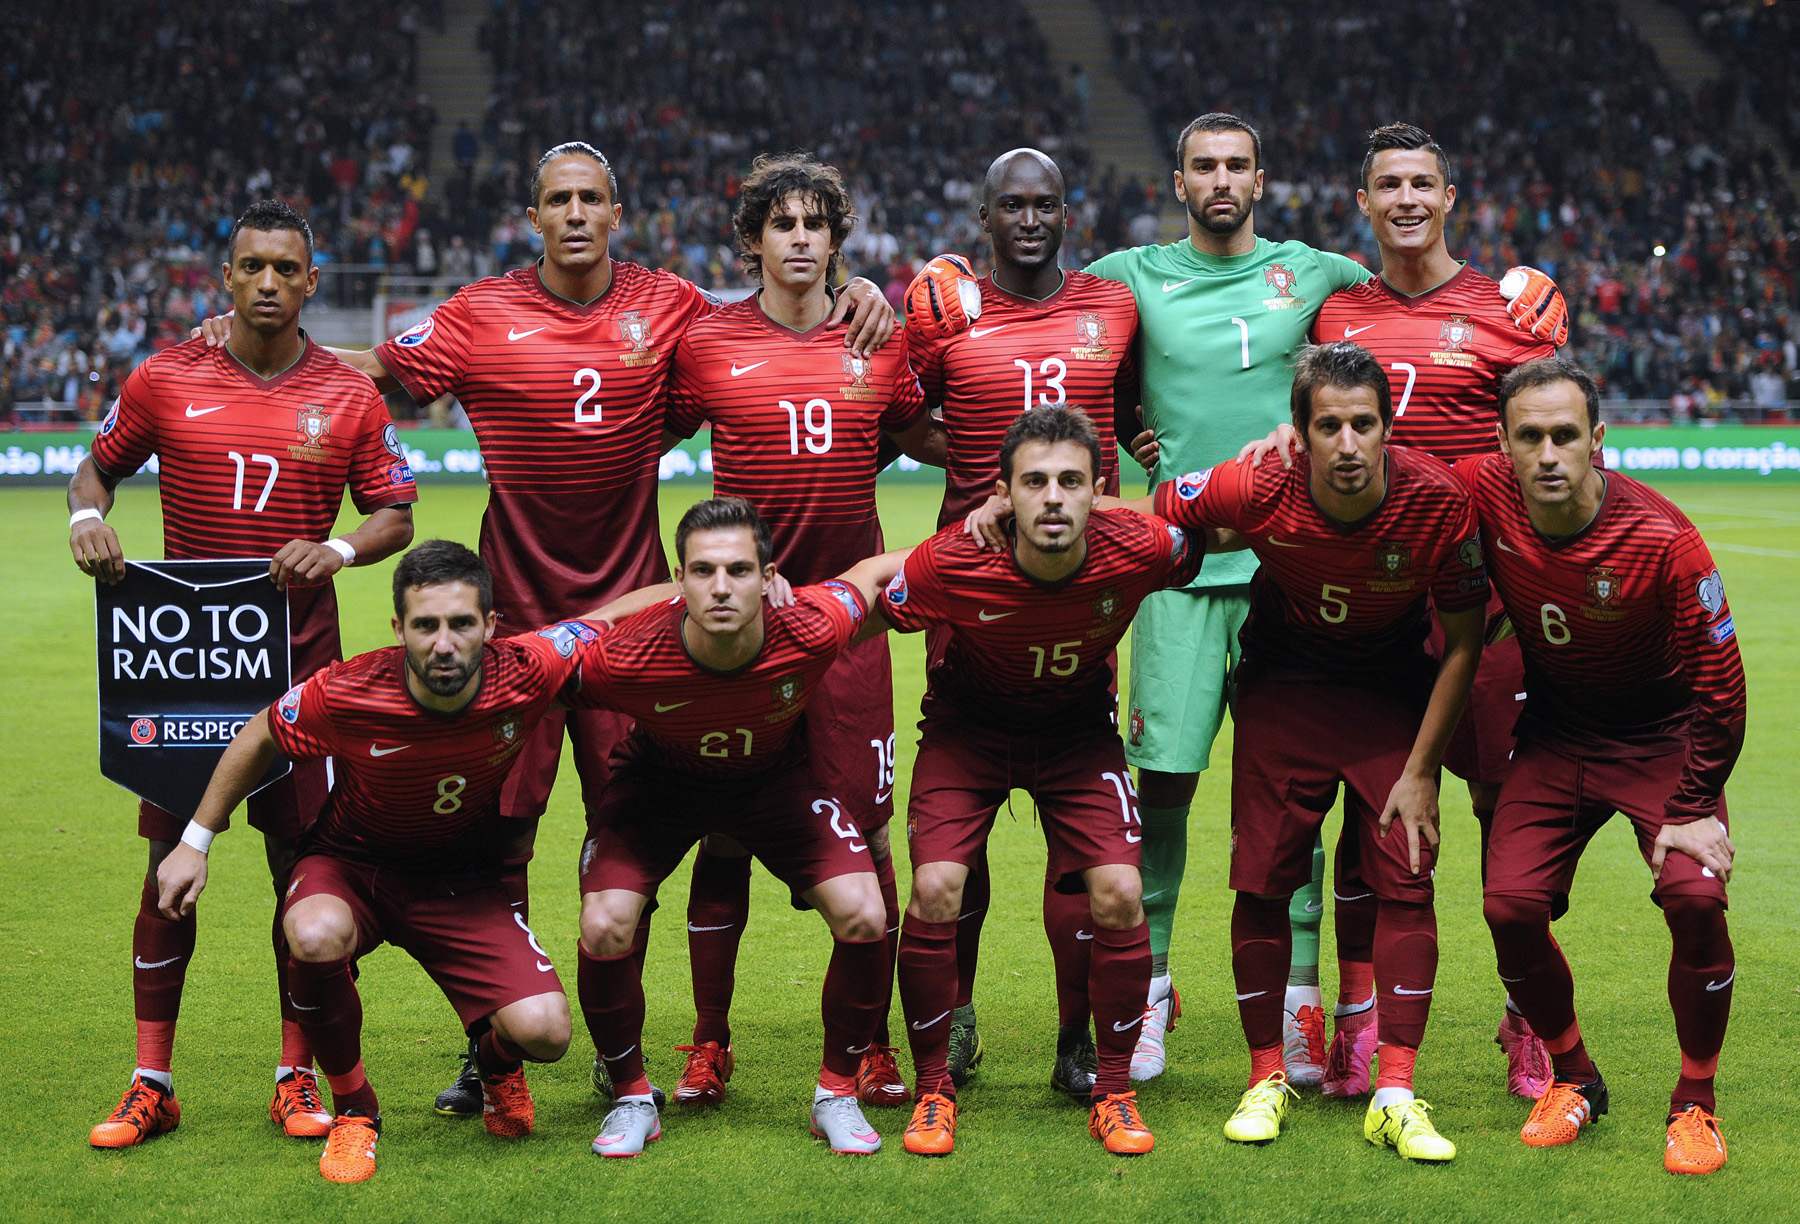 Portugal's players (top L-R) forward Nani, defender Bruno Alves, midfielder Tiago, midfielder Danilo Pereira, goalkeeper Rui Patricio, forward Cristiano Ronaldo and (bottom L-R) midfielder Joao Moutinho, defender Cedric Soares, midfielder Bernardo Silva, defender Fabio Coentrao and defender Ricardo Carvalho pose before the Euro 2016 qualifying football match Portugal vs Denmark at the Municipal stadium in Braga on October 8, 2015. Portugal won the match 1-0. AFP PHOTO/ MIGUEL RIOPA (Photo credit should read MIGUEL RIOPA/AFP/Getty Images)